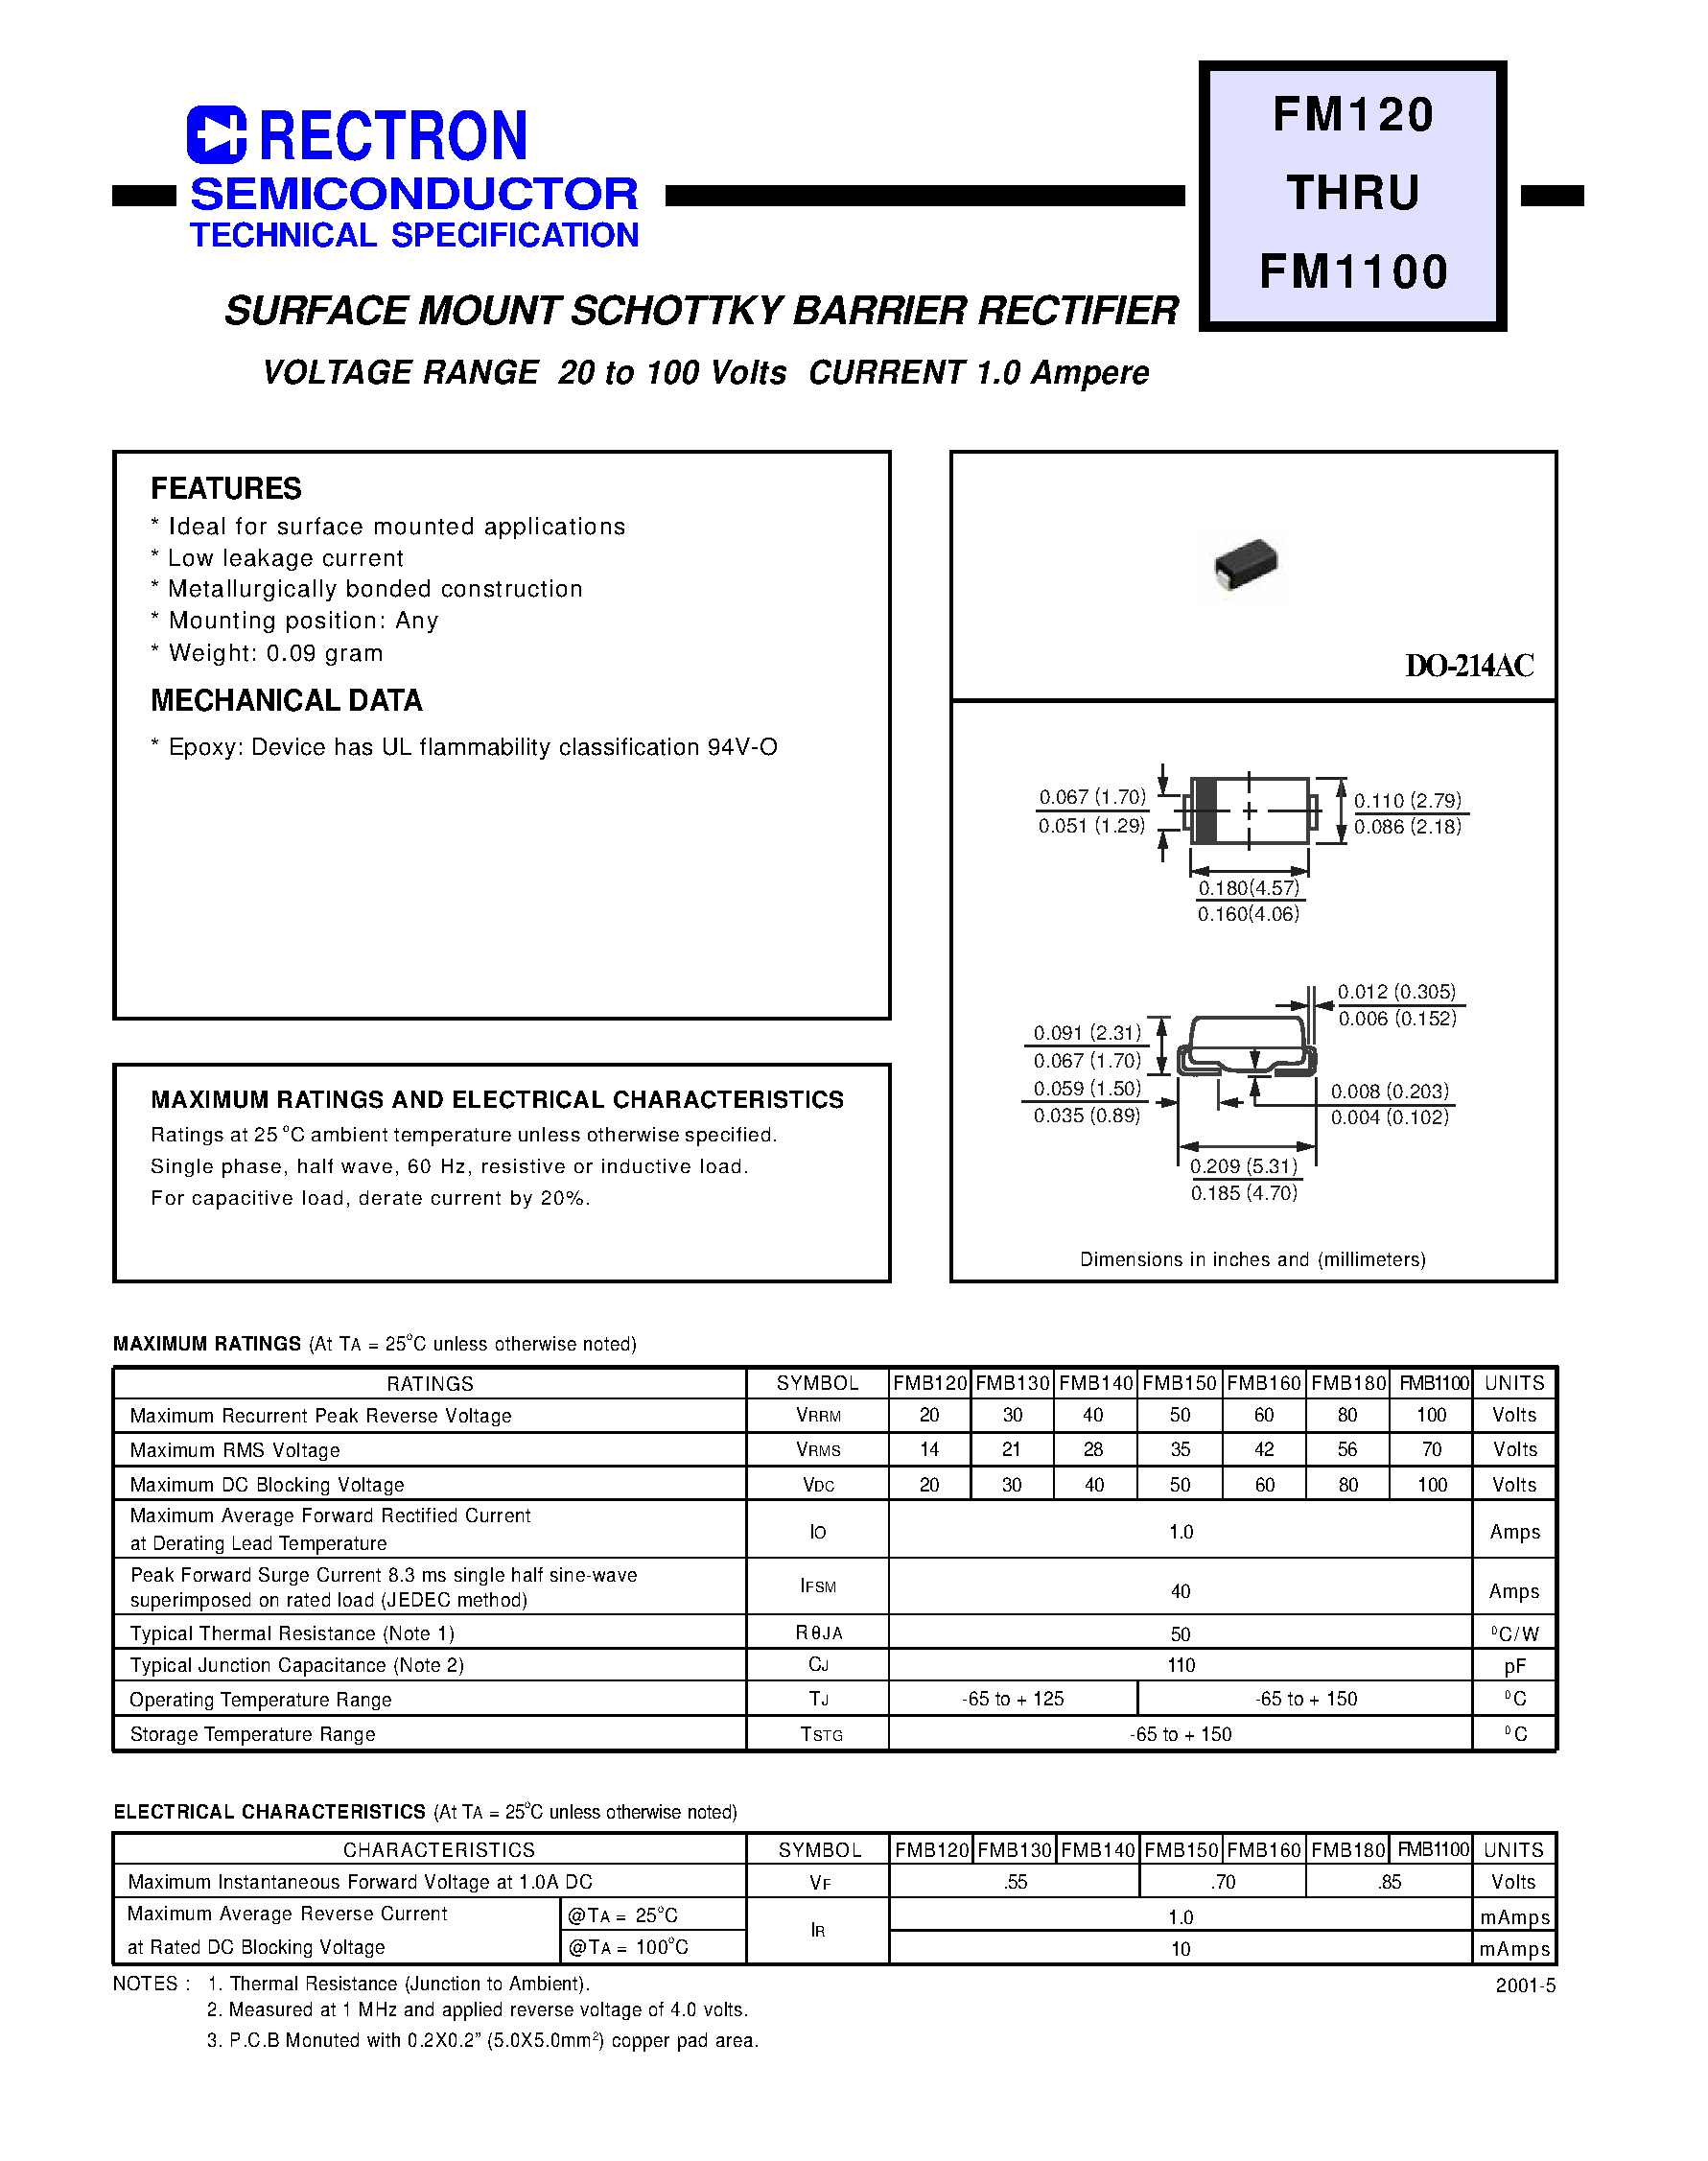 Datasheet FMB120 - SURFACE MOUNT SCHOTTKY BARRIER RECTIFIER (VOLTAGE RANGE 20 to 100 Volts CURRENT 1.0 Ampere) page 1